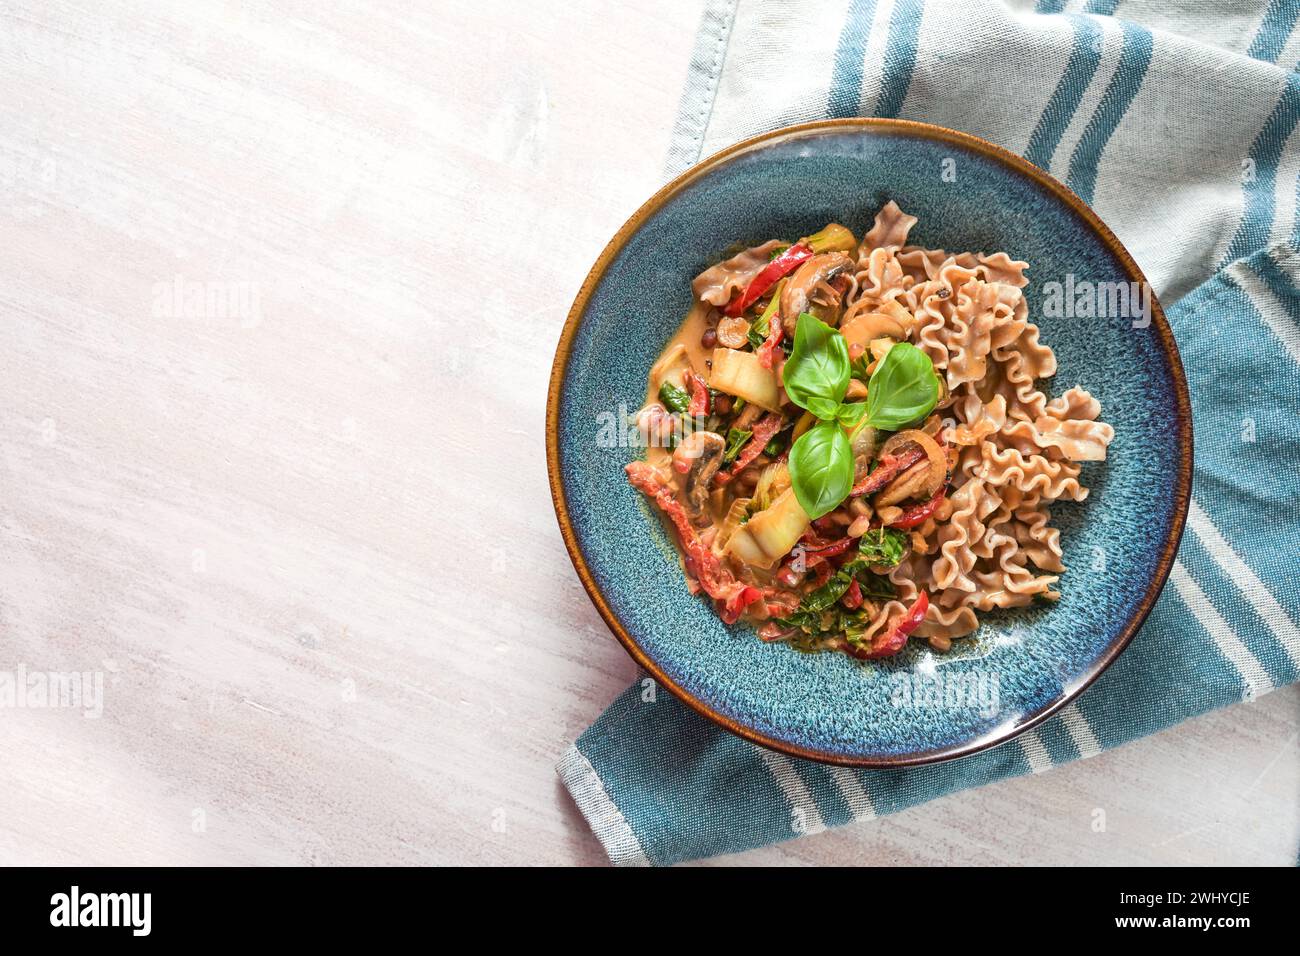 Healthy dish from wholemeal spelt pasta with vegetables in tomato sauce and basil garnish in a blue plate on a white wooden tabl Stock Photo